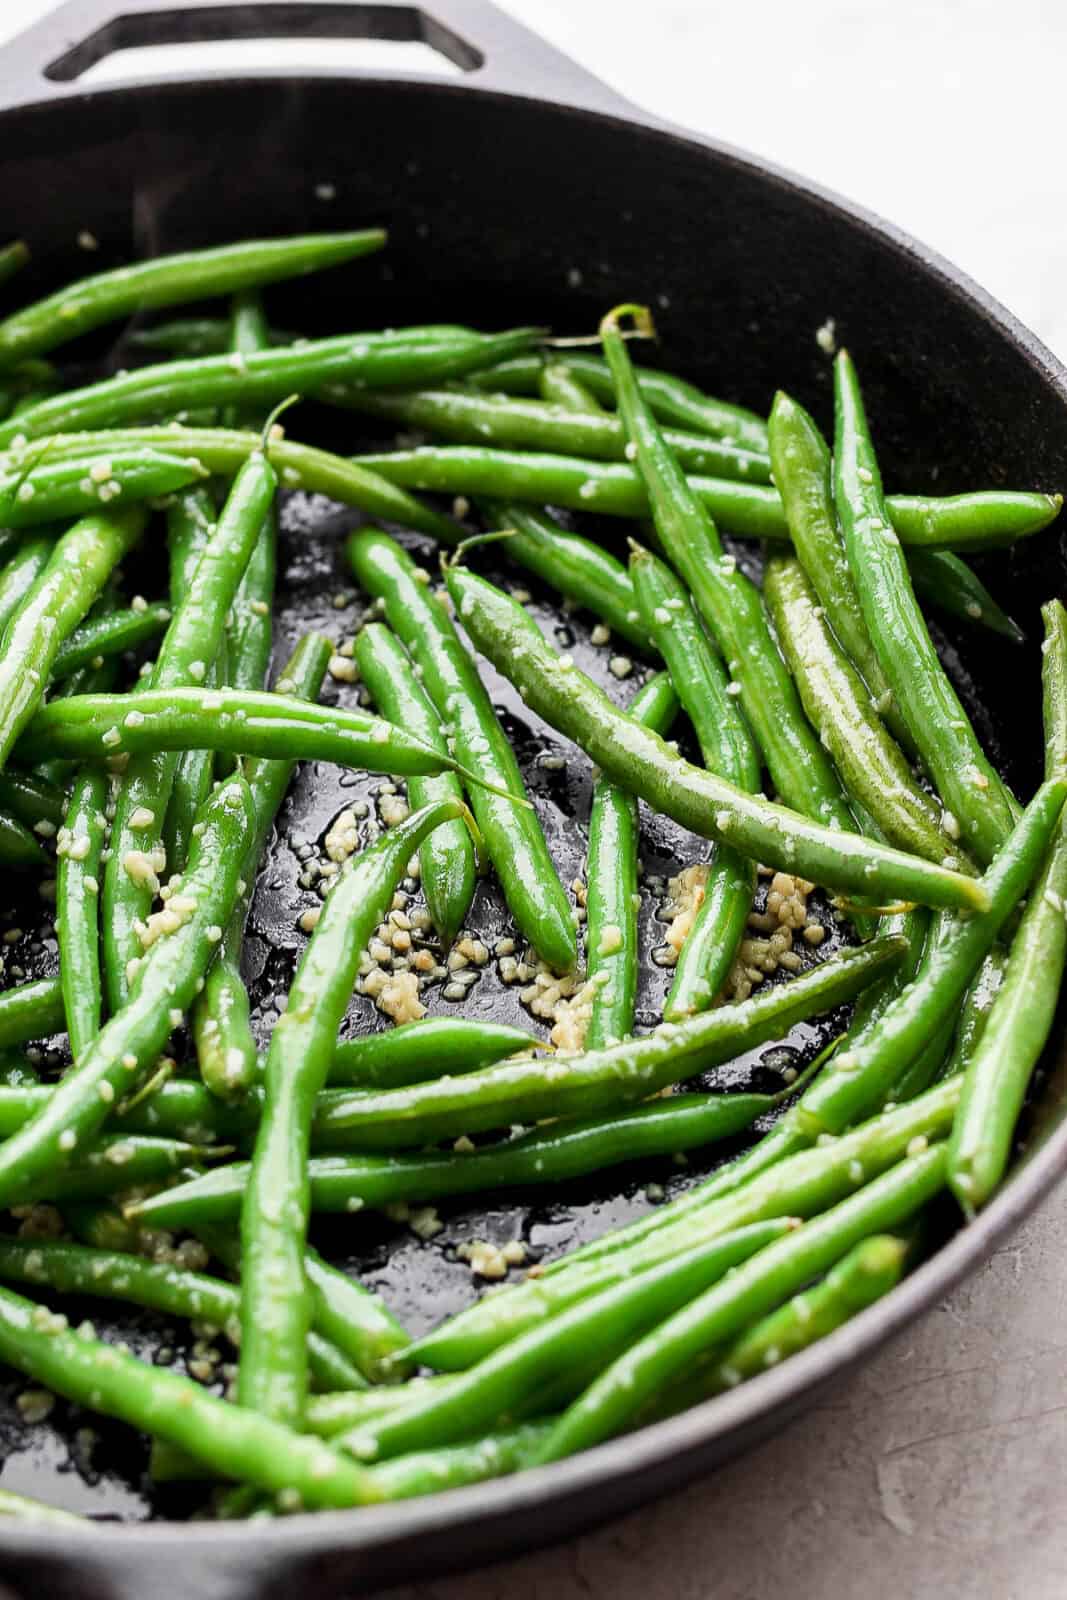 Garlic green beans in a cast iron skillet.